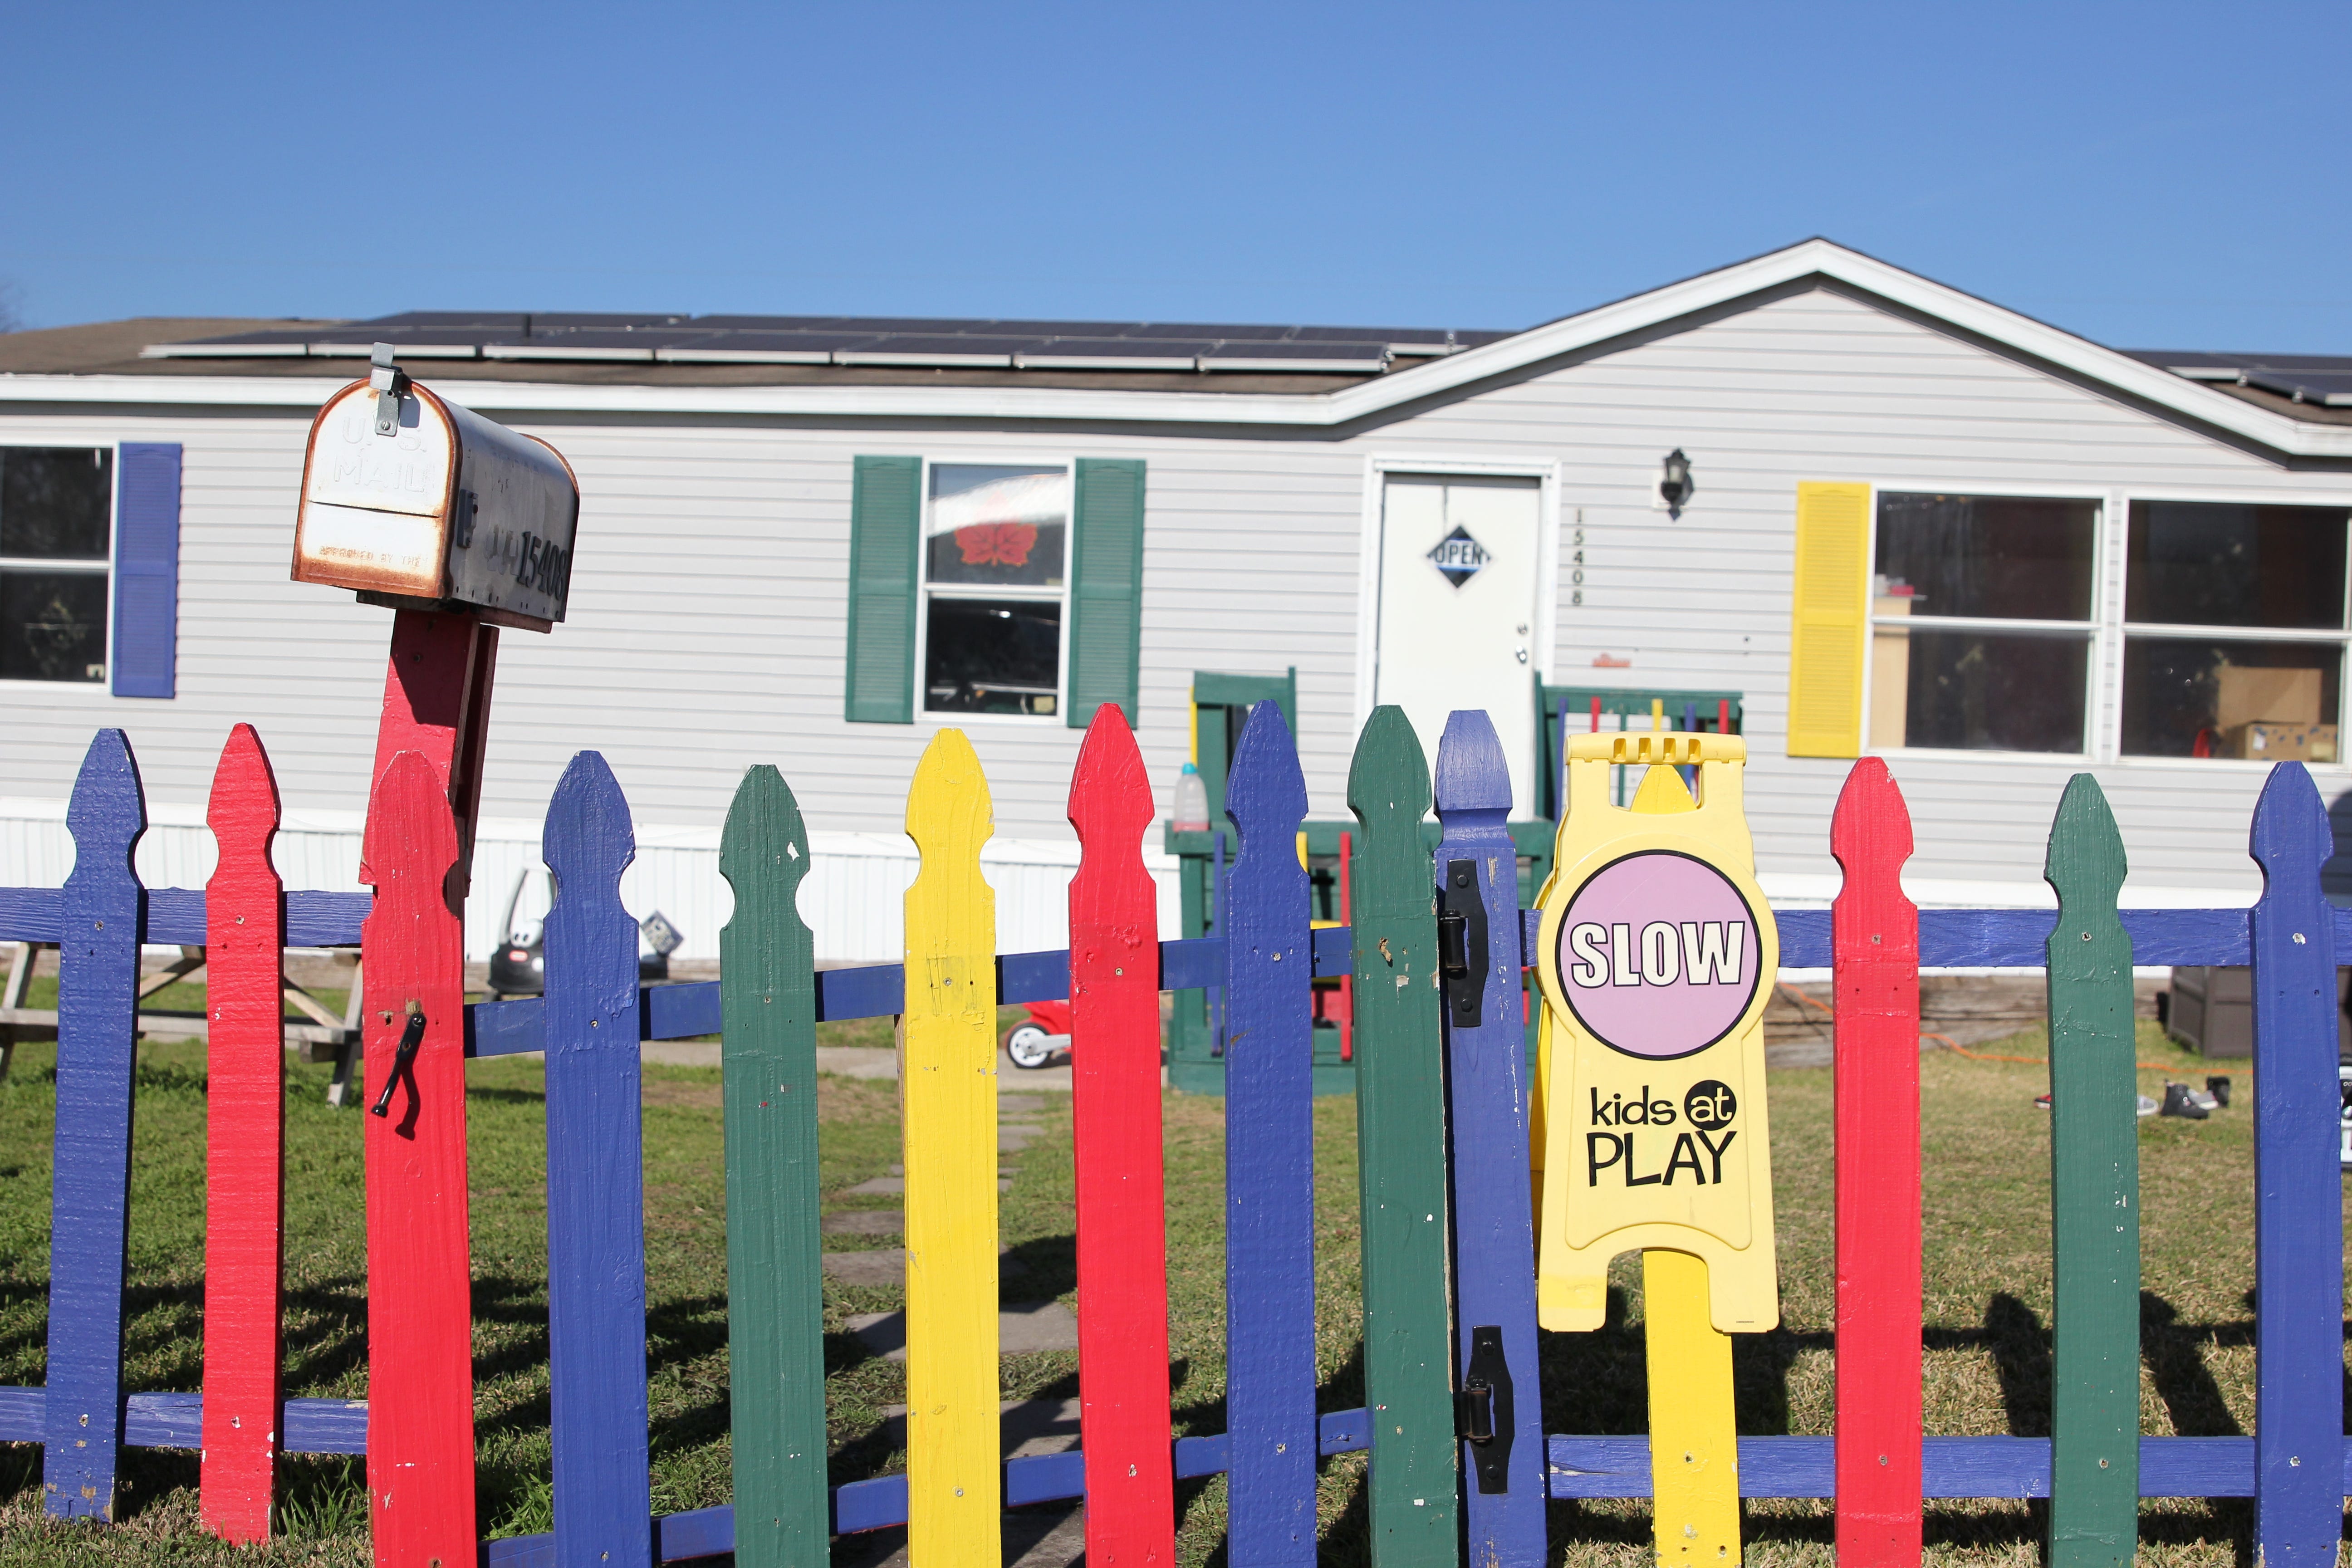 A sign reading "Slow. Kids at Play" is seen hanging on a multicolored fence in front of a suburban house.